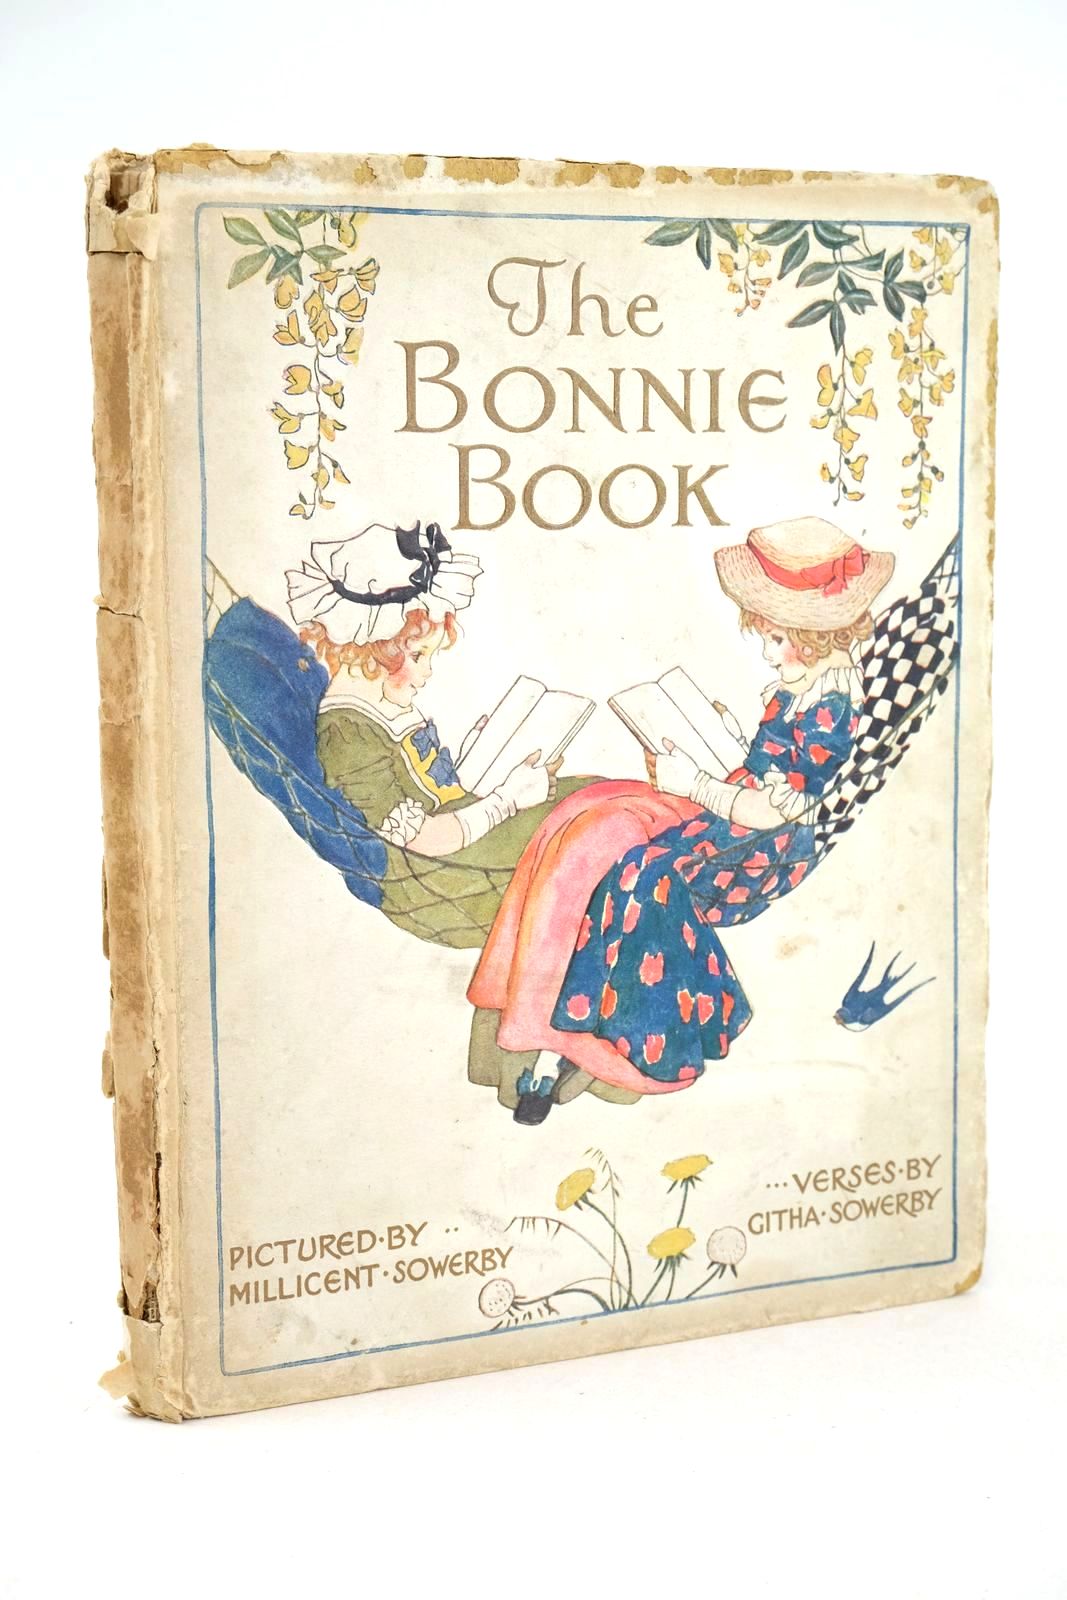 Photo of THE BONNIE BOOK written by Sowerby, Githa illustrated by Sowerby, Millicent published by Oxford University Press, Humphrey Milford (STOCK CODE: 1325918)  for sale by Stella & Rose's Books